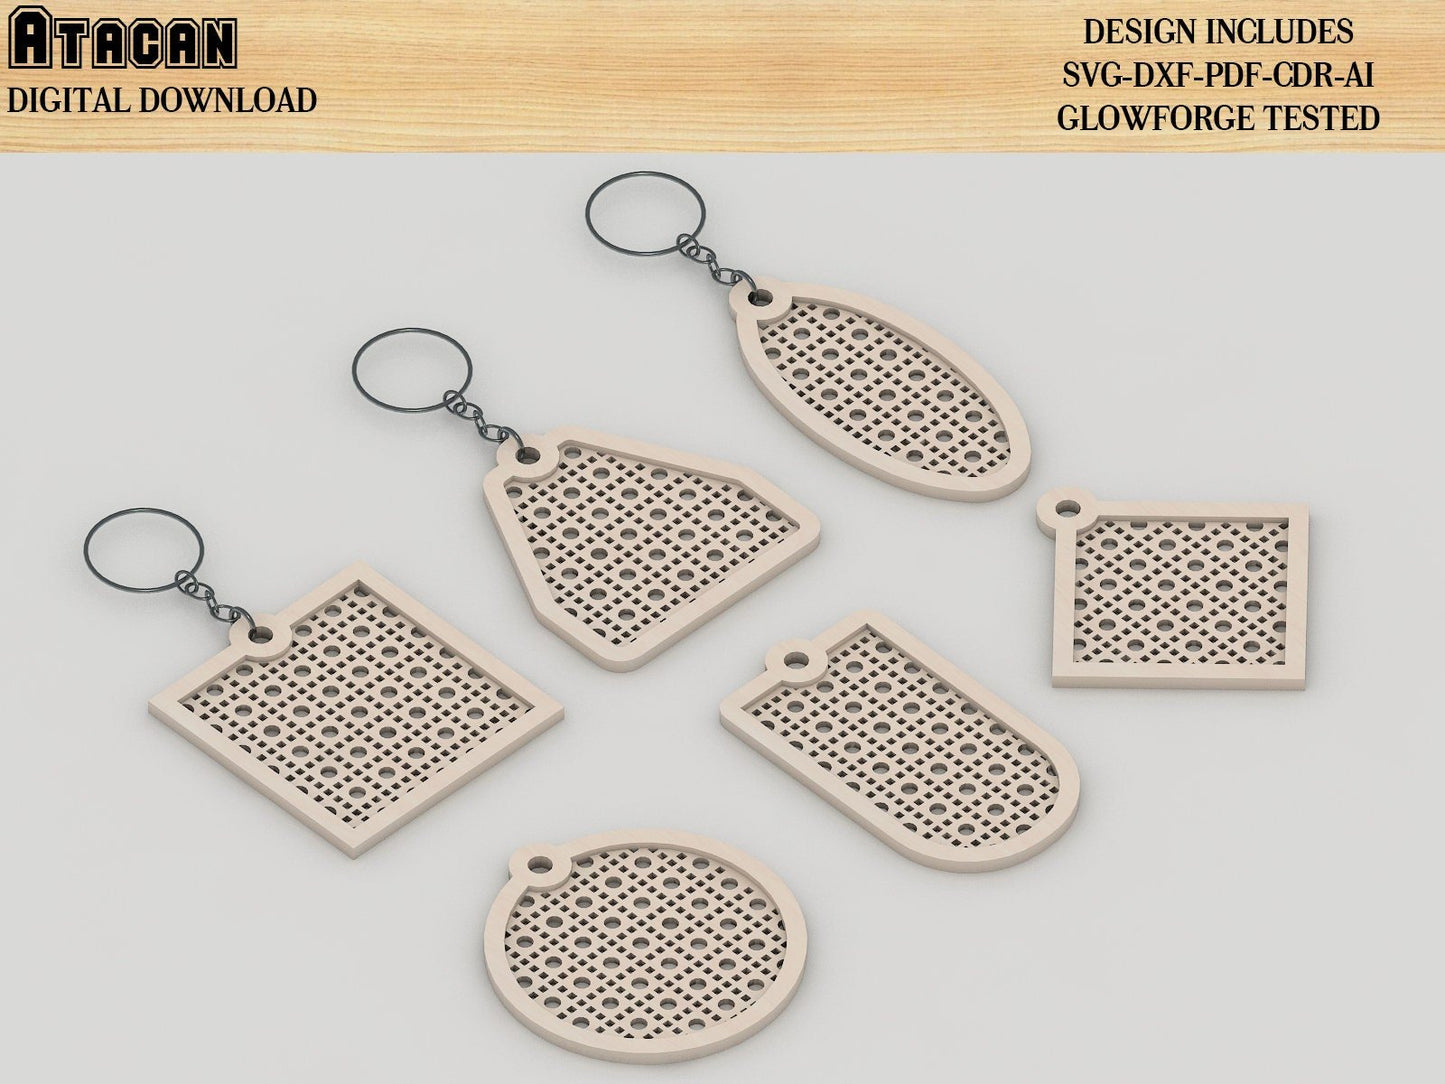 Rattan cane Keychain Designs / Rattan Patterned Keychain Laser cut Svg files / Glowforge Vector files 407